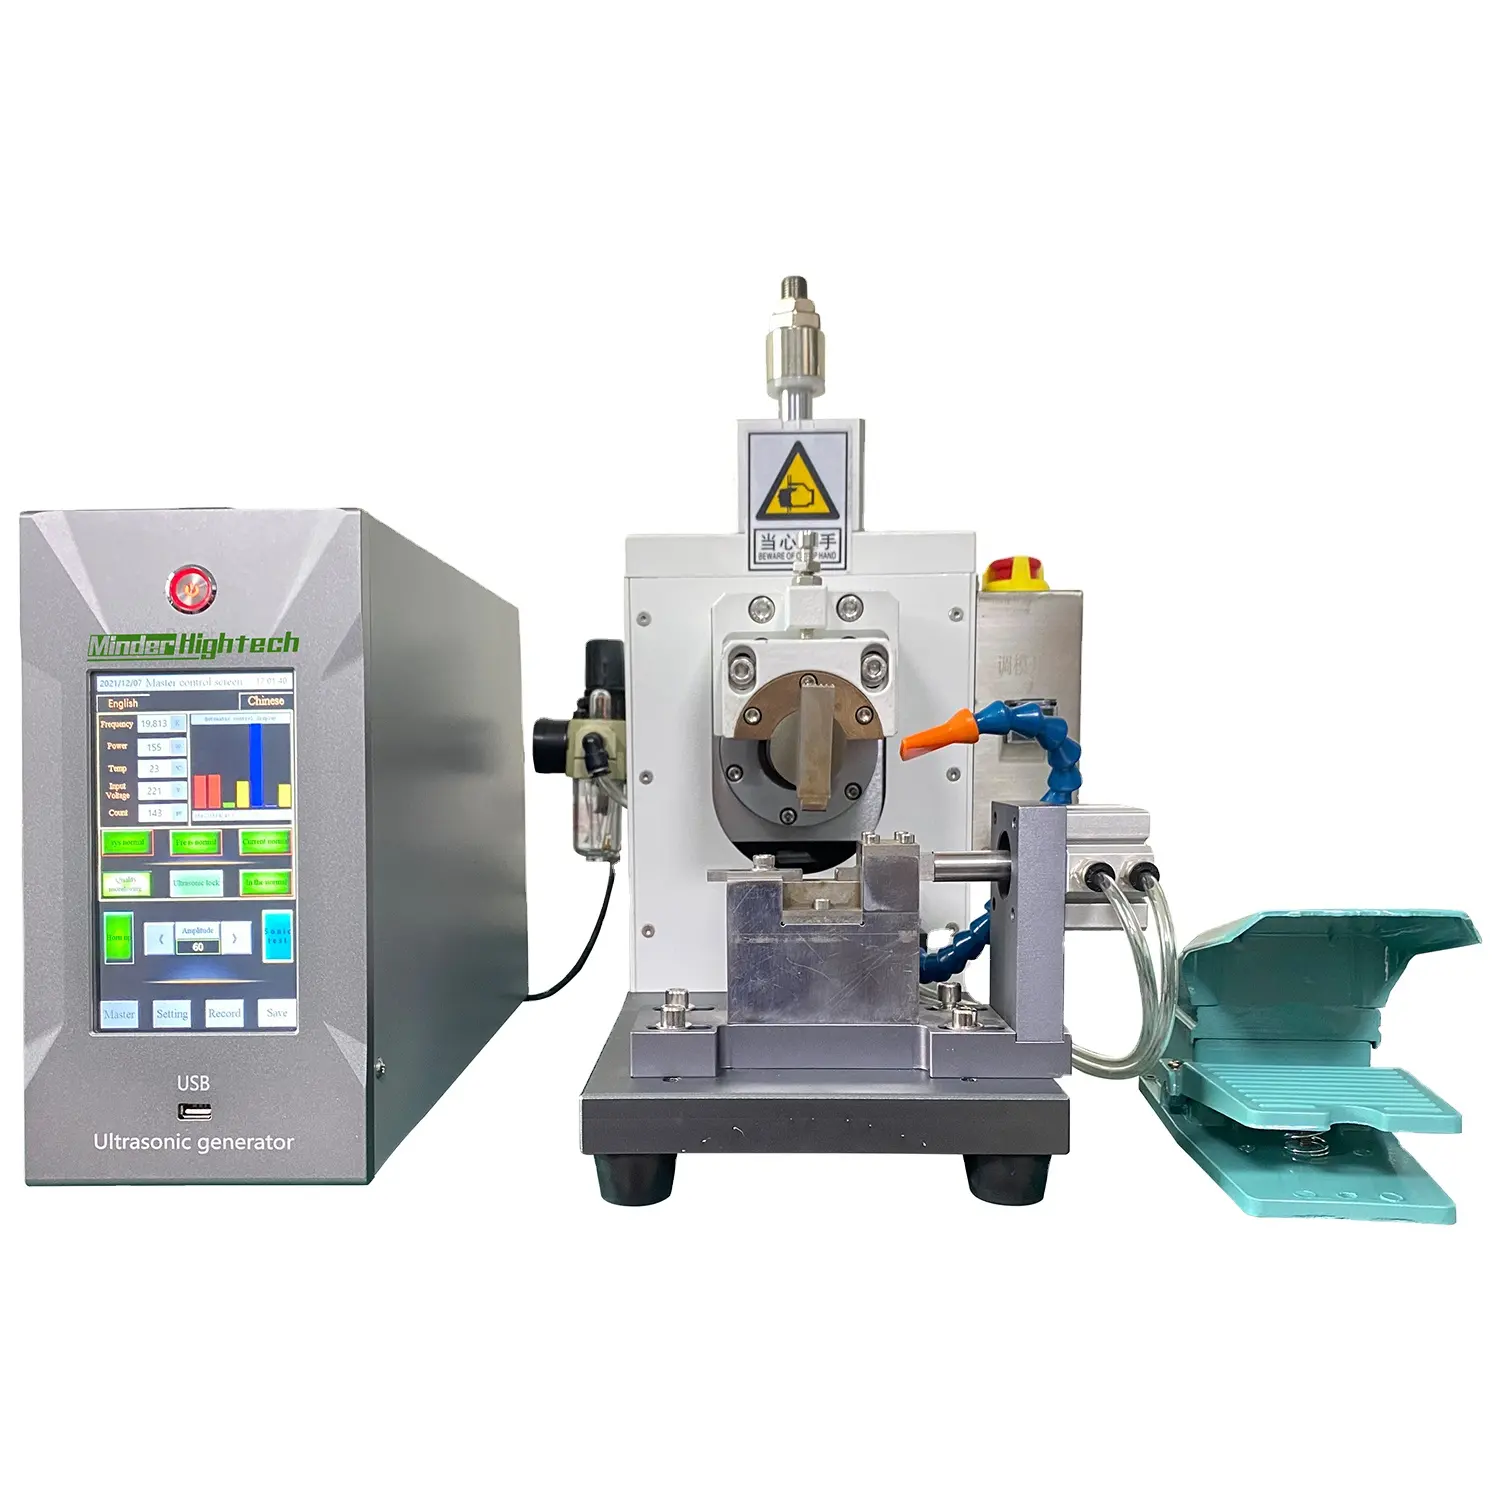 Ultrasonic Welding Machine to Weld Nickel to the Battery Current Collecting